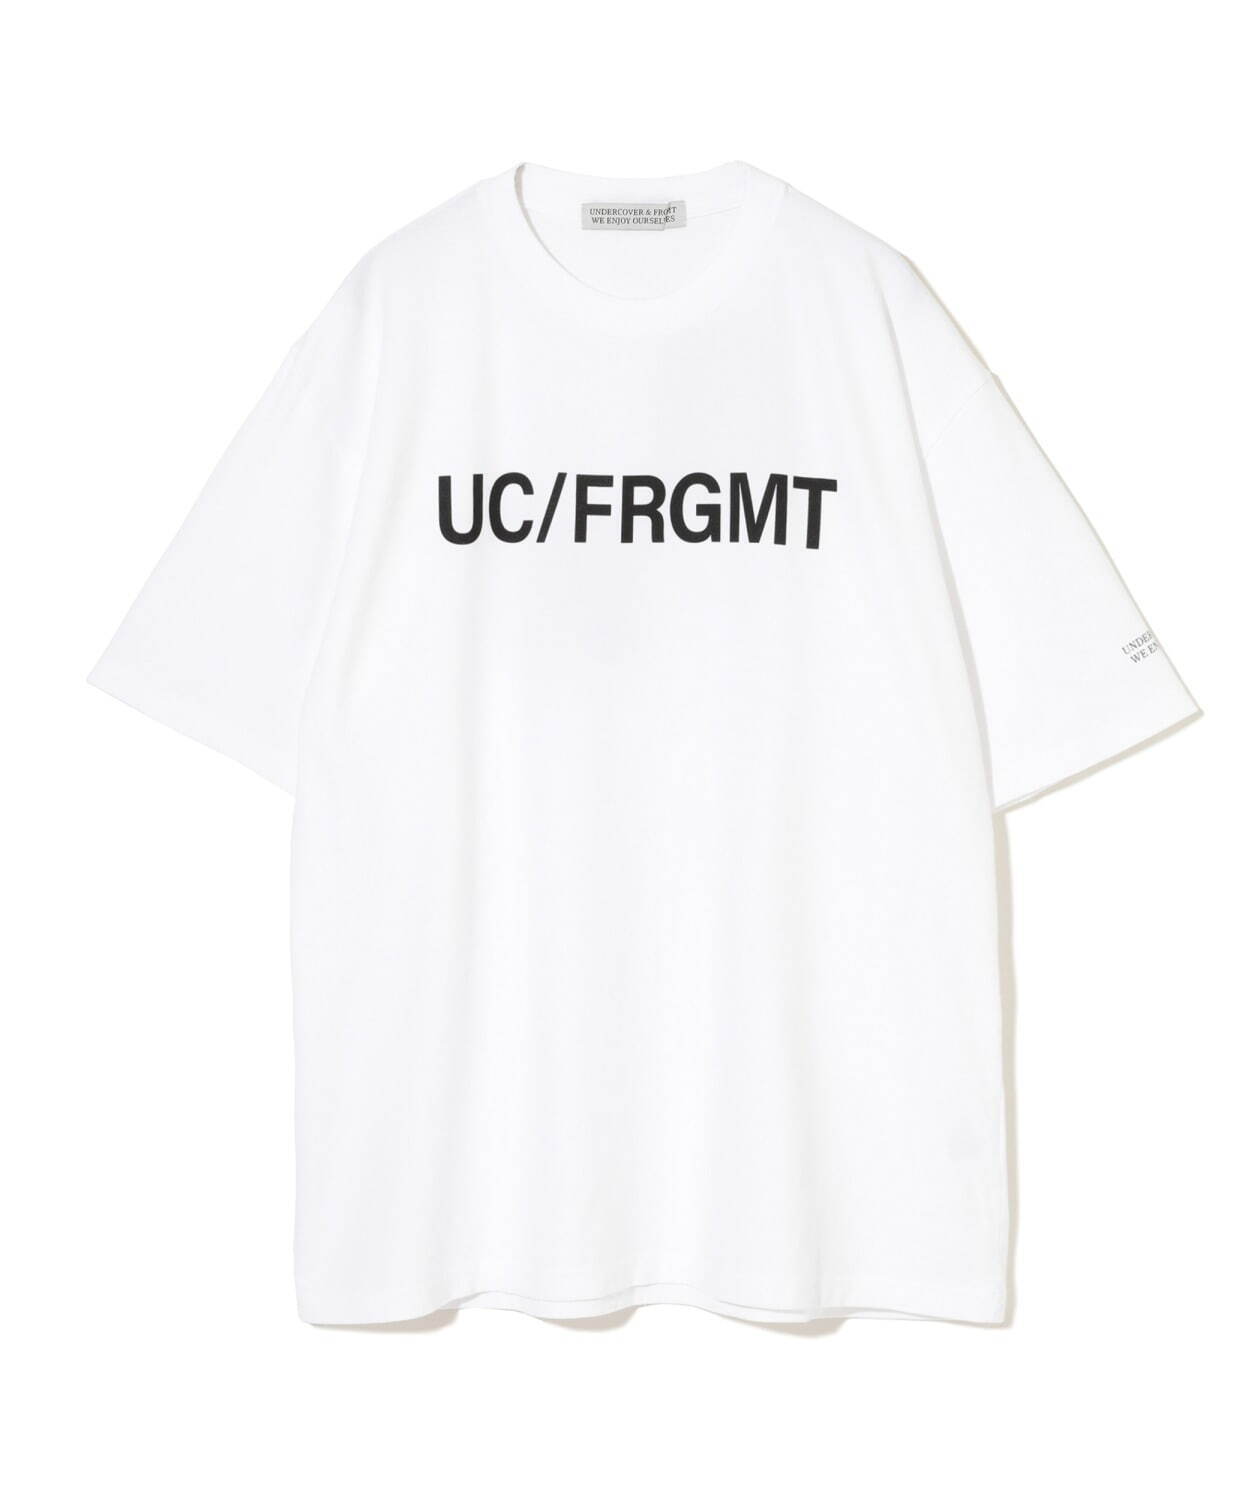 Product photos of UNDERCOVER & fragment design's FW23 Manuel Göttsching collab